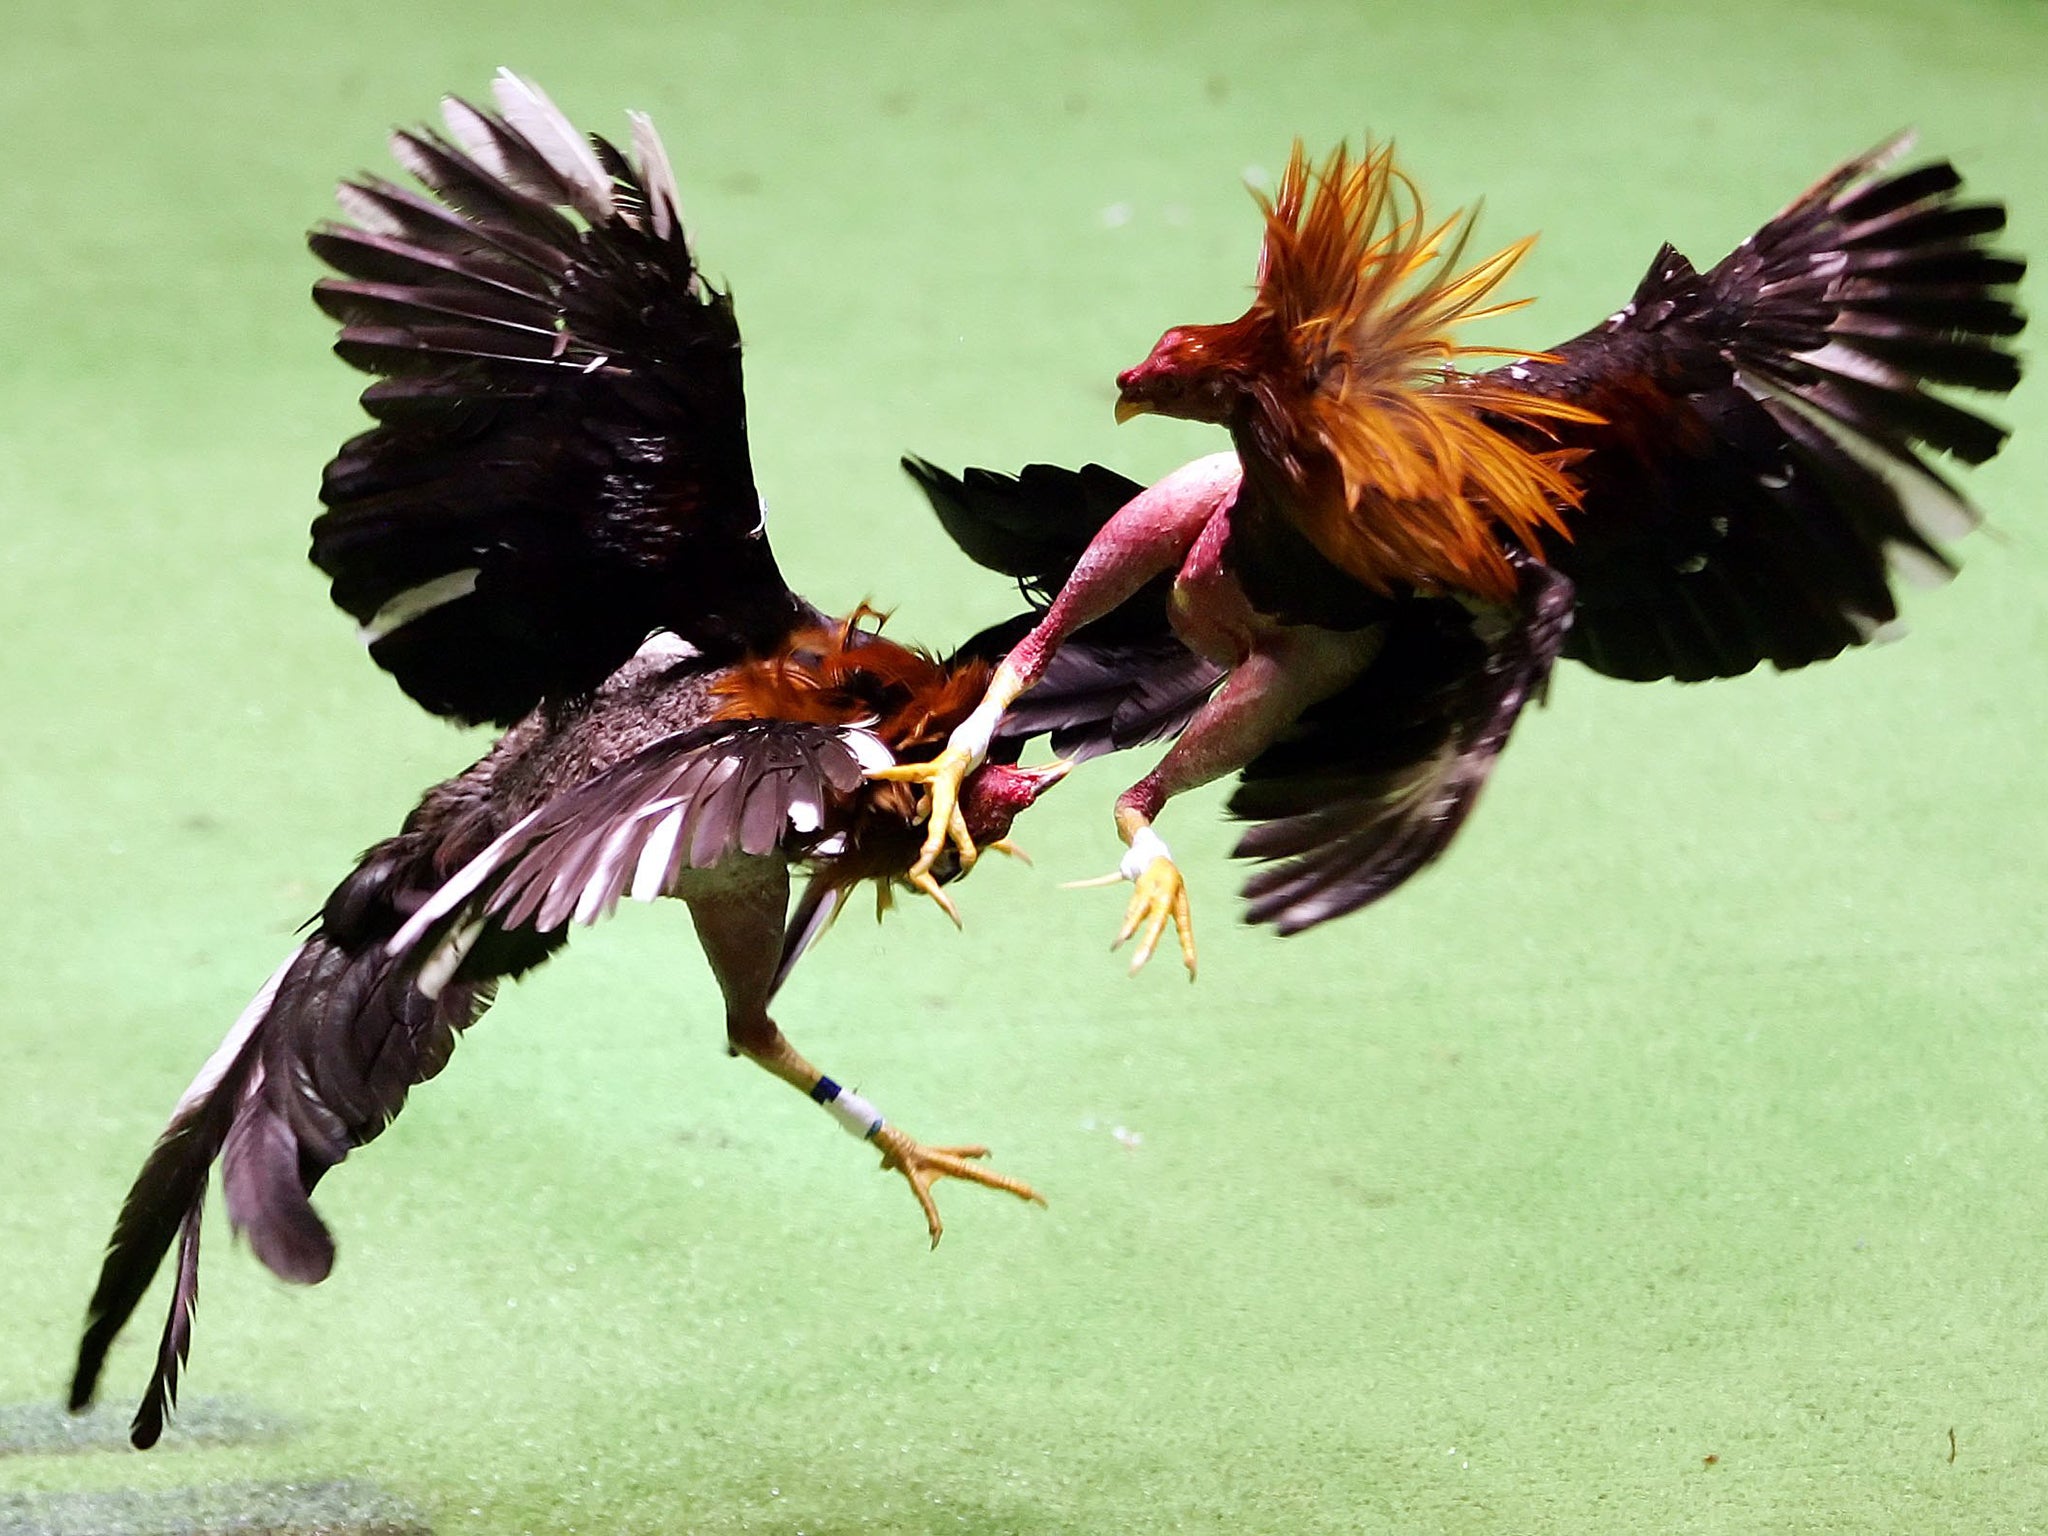 Cockfighting is a 400-year-old tradition on the Caribbean island and brings a lot of revenue to the economy